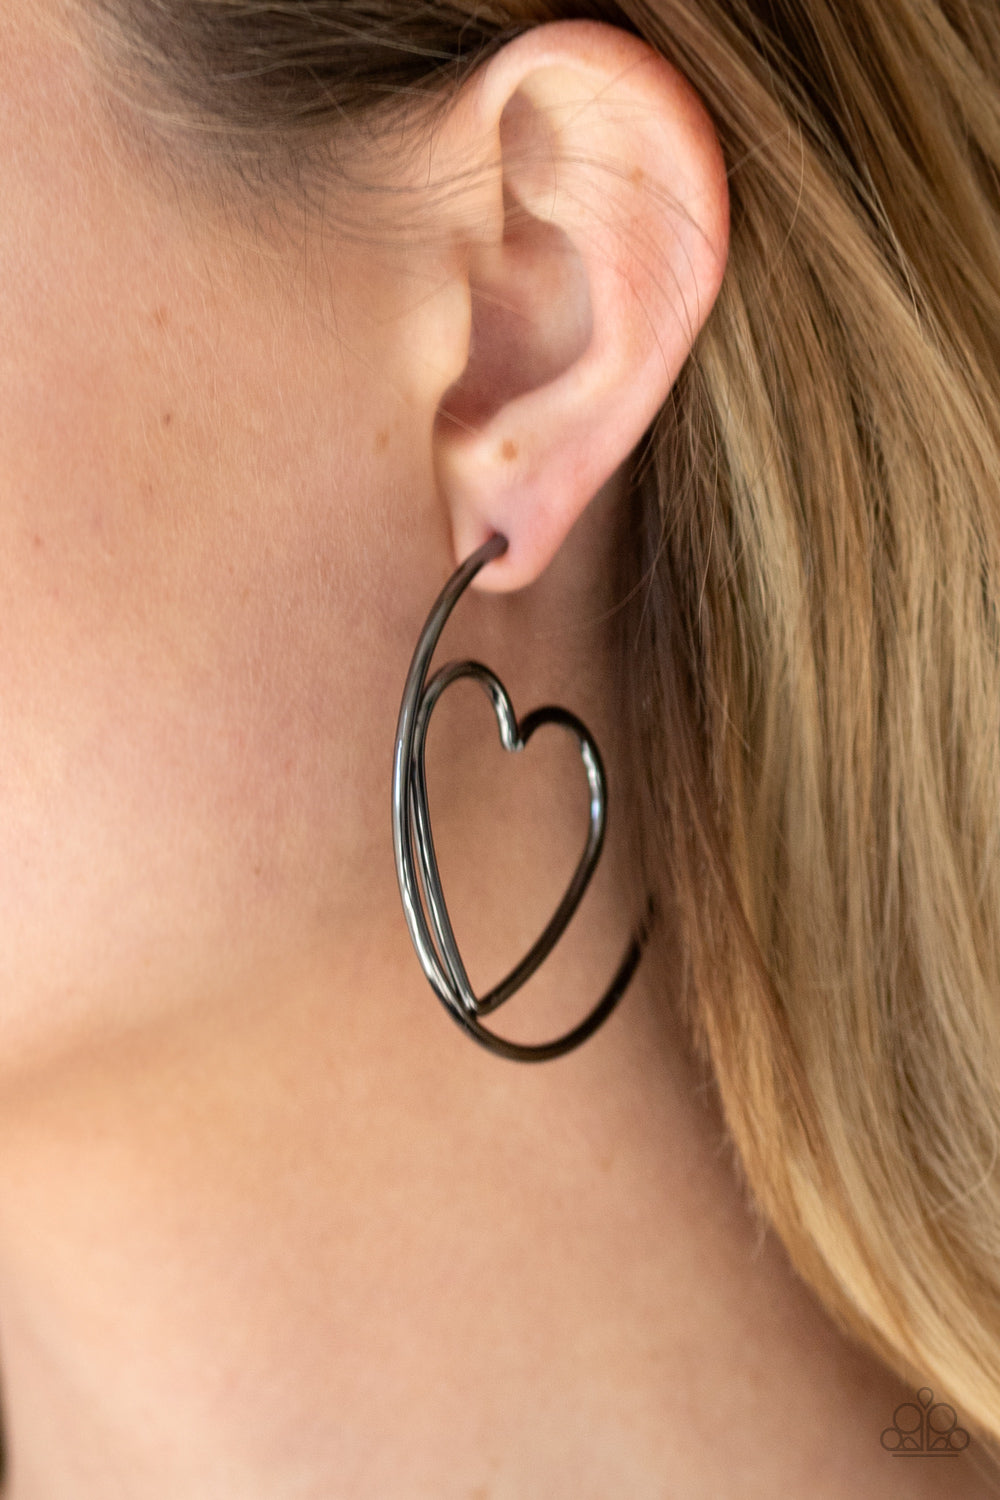 Glistening gunmetal wire delicately bends into an airy heart frame inside a classic gunmetal hoop, creating a flirtatious display. Earring attaches to a standard post fitting. Hoop measures approximately 2